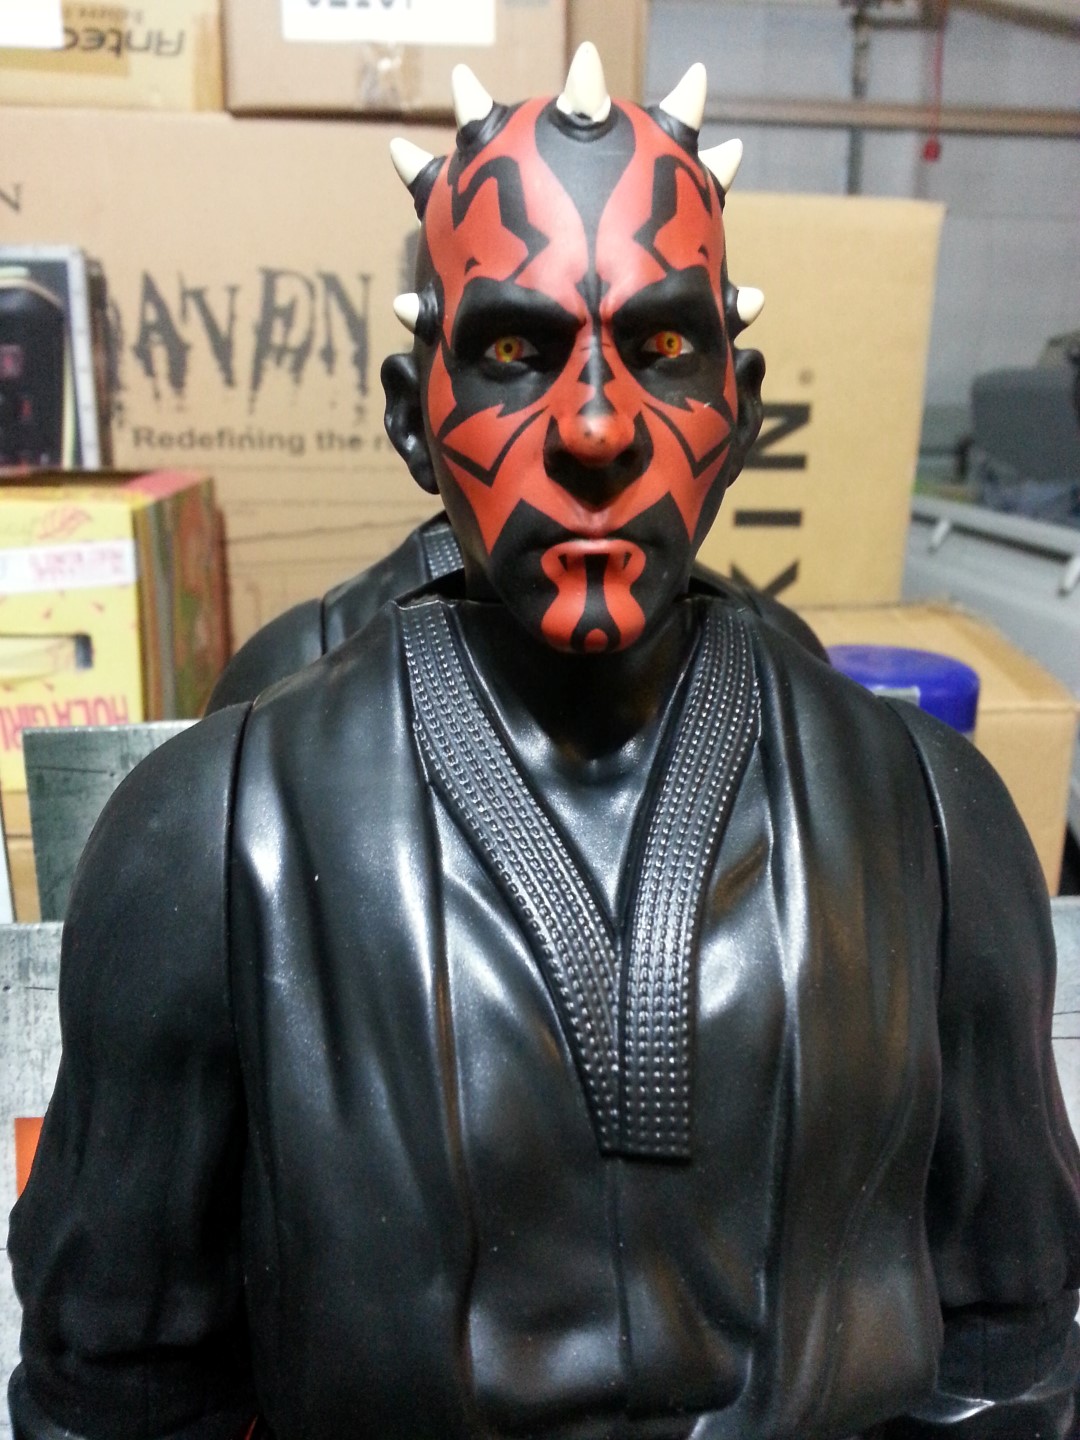 Darth Maul is more detailed that expected.